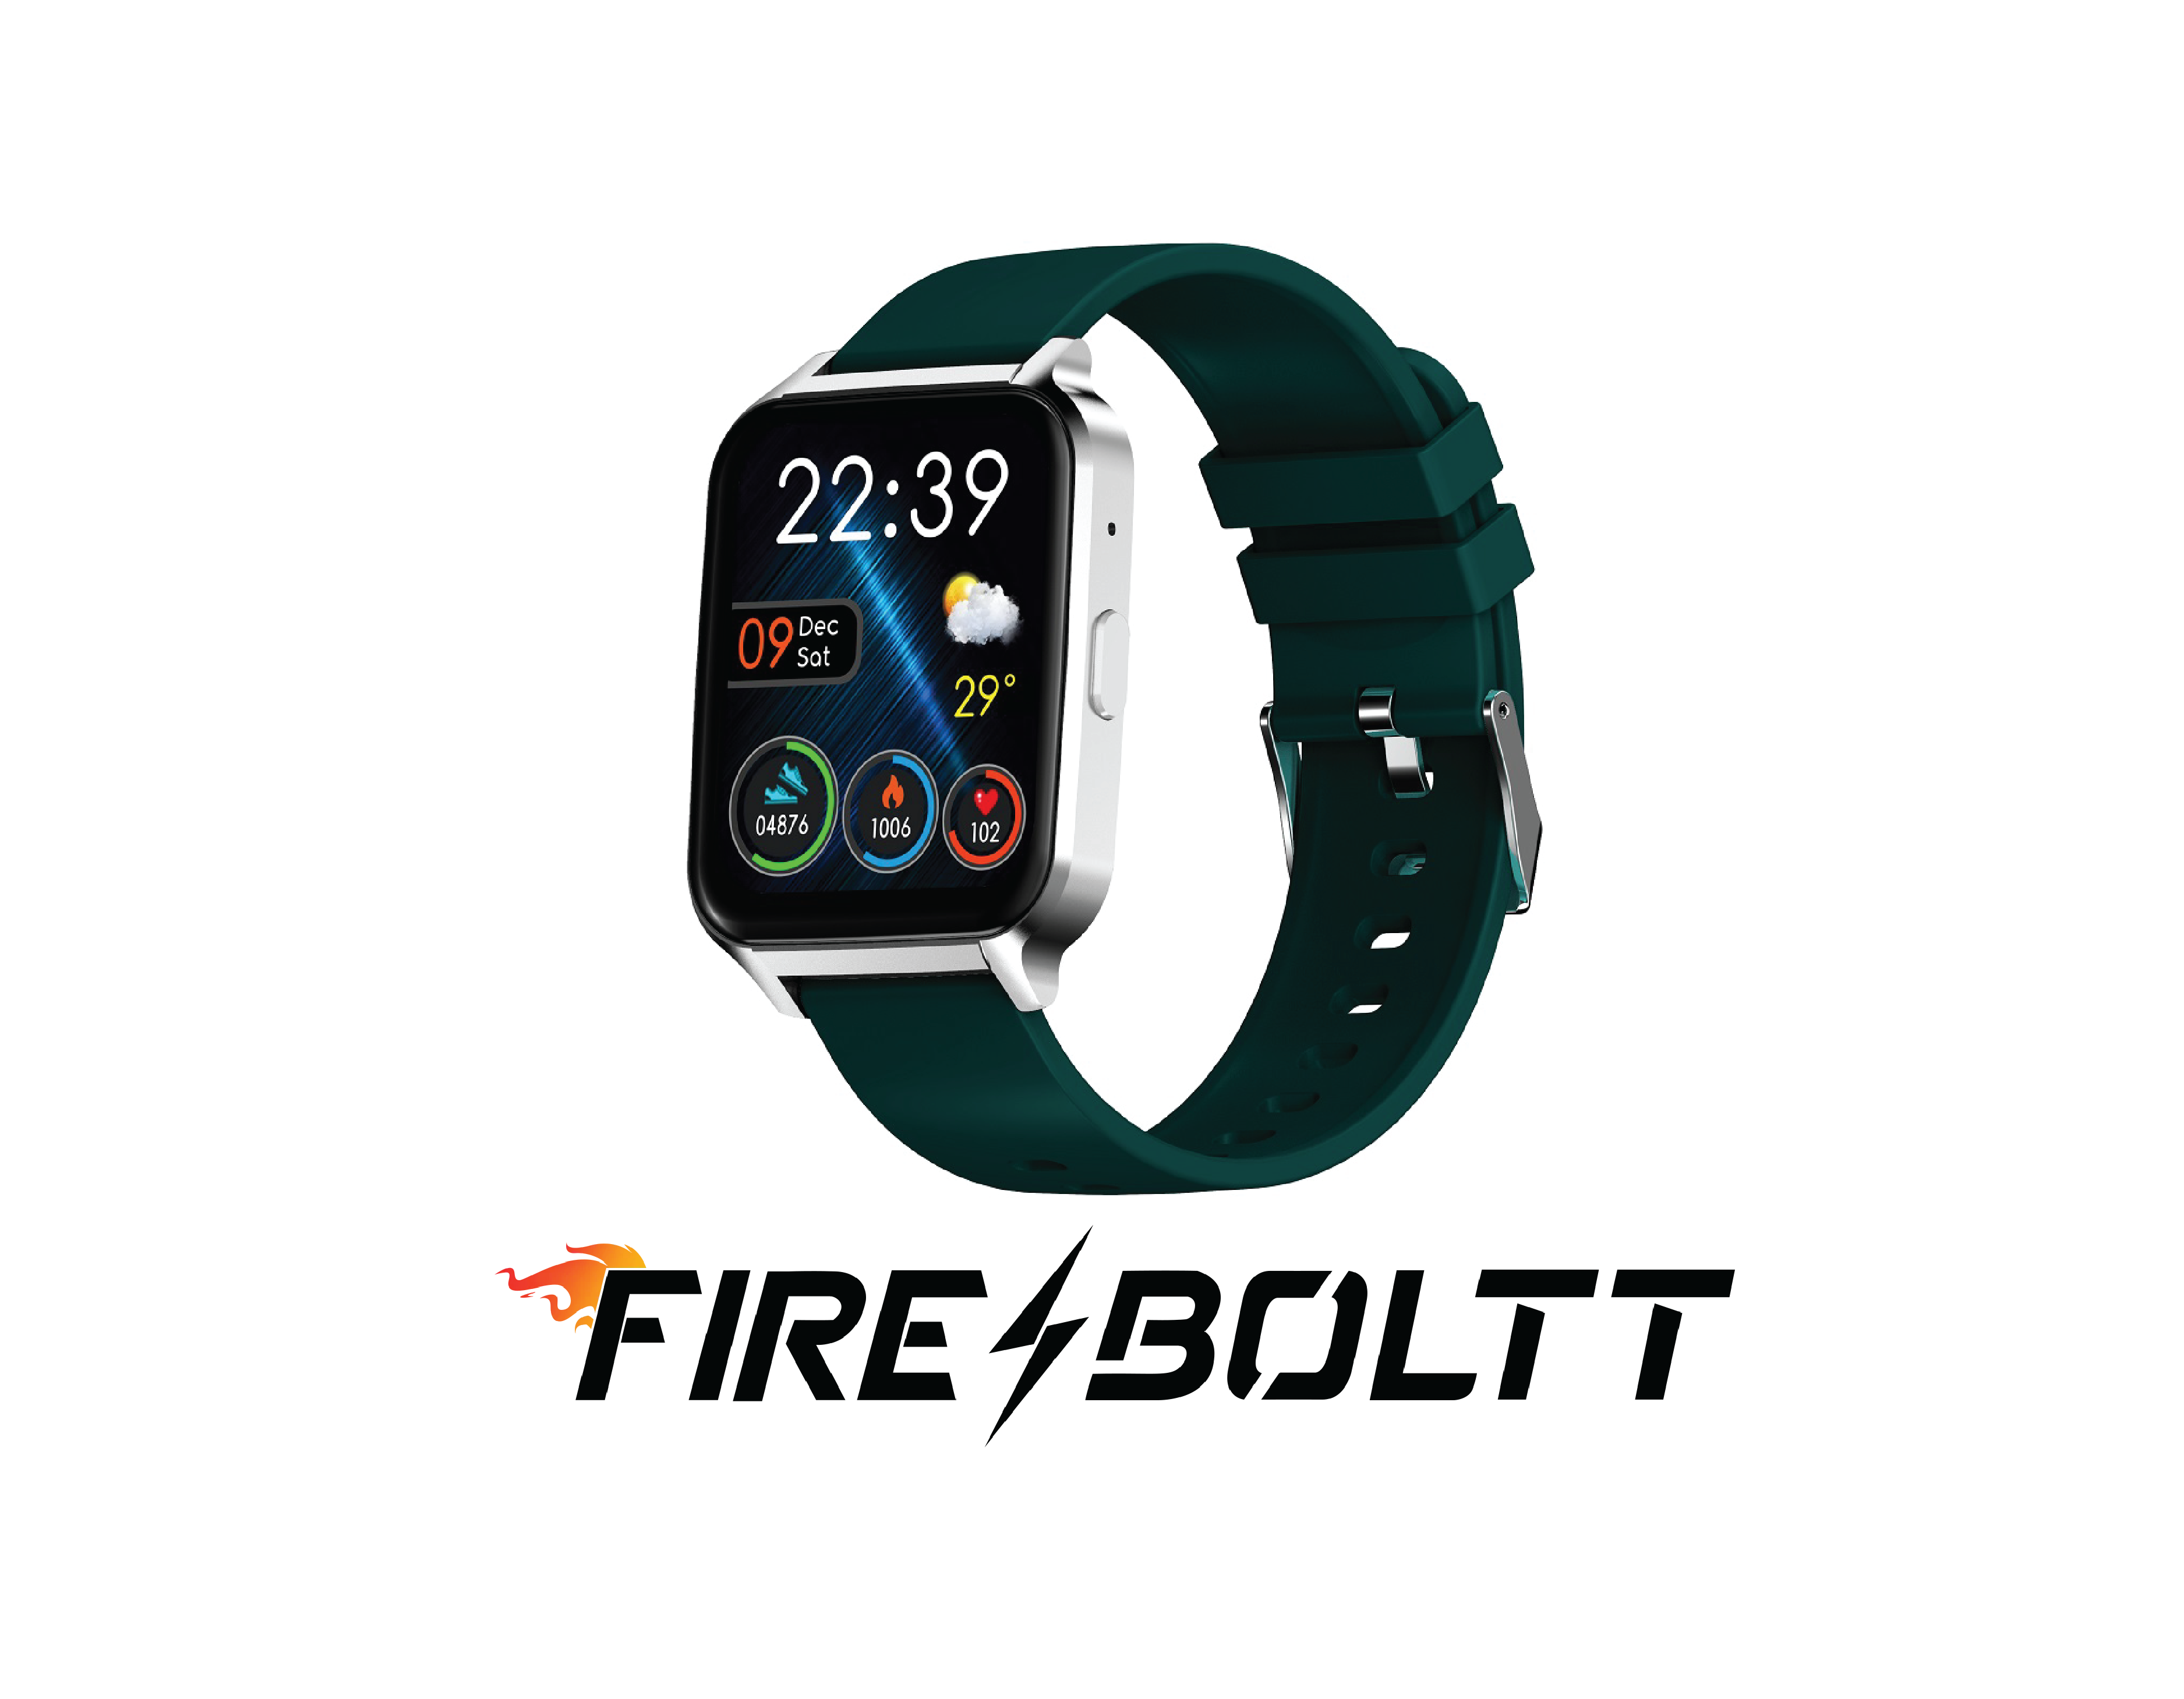 Fire-Boltt launches Tornado Calling smartwatch with best-in-the-class display